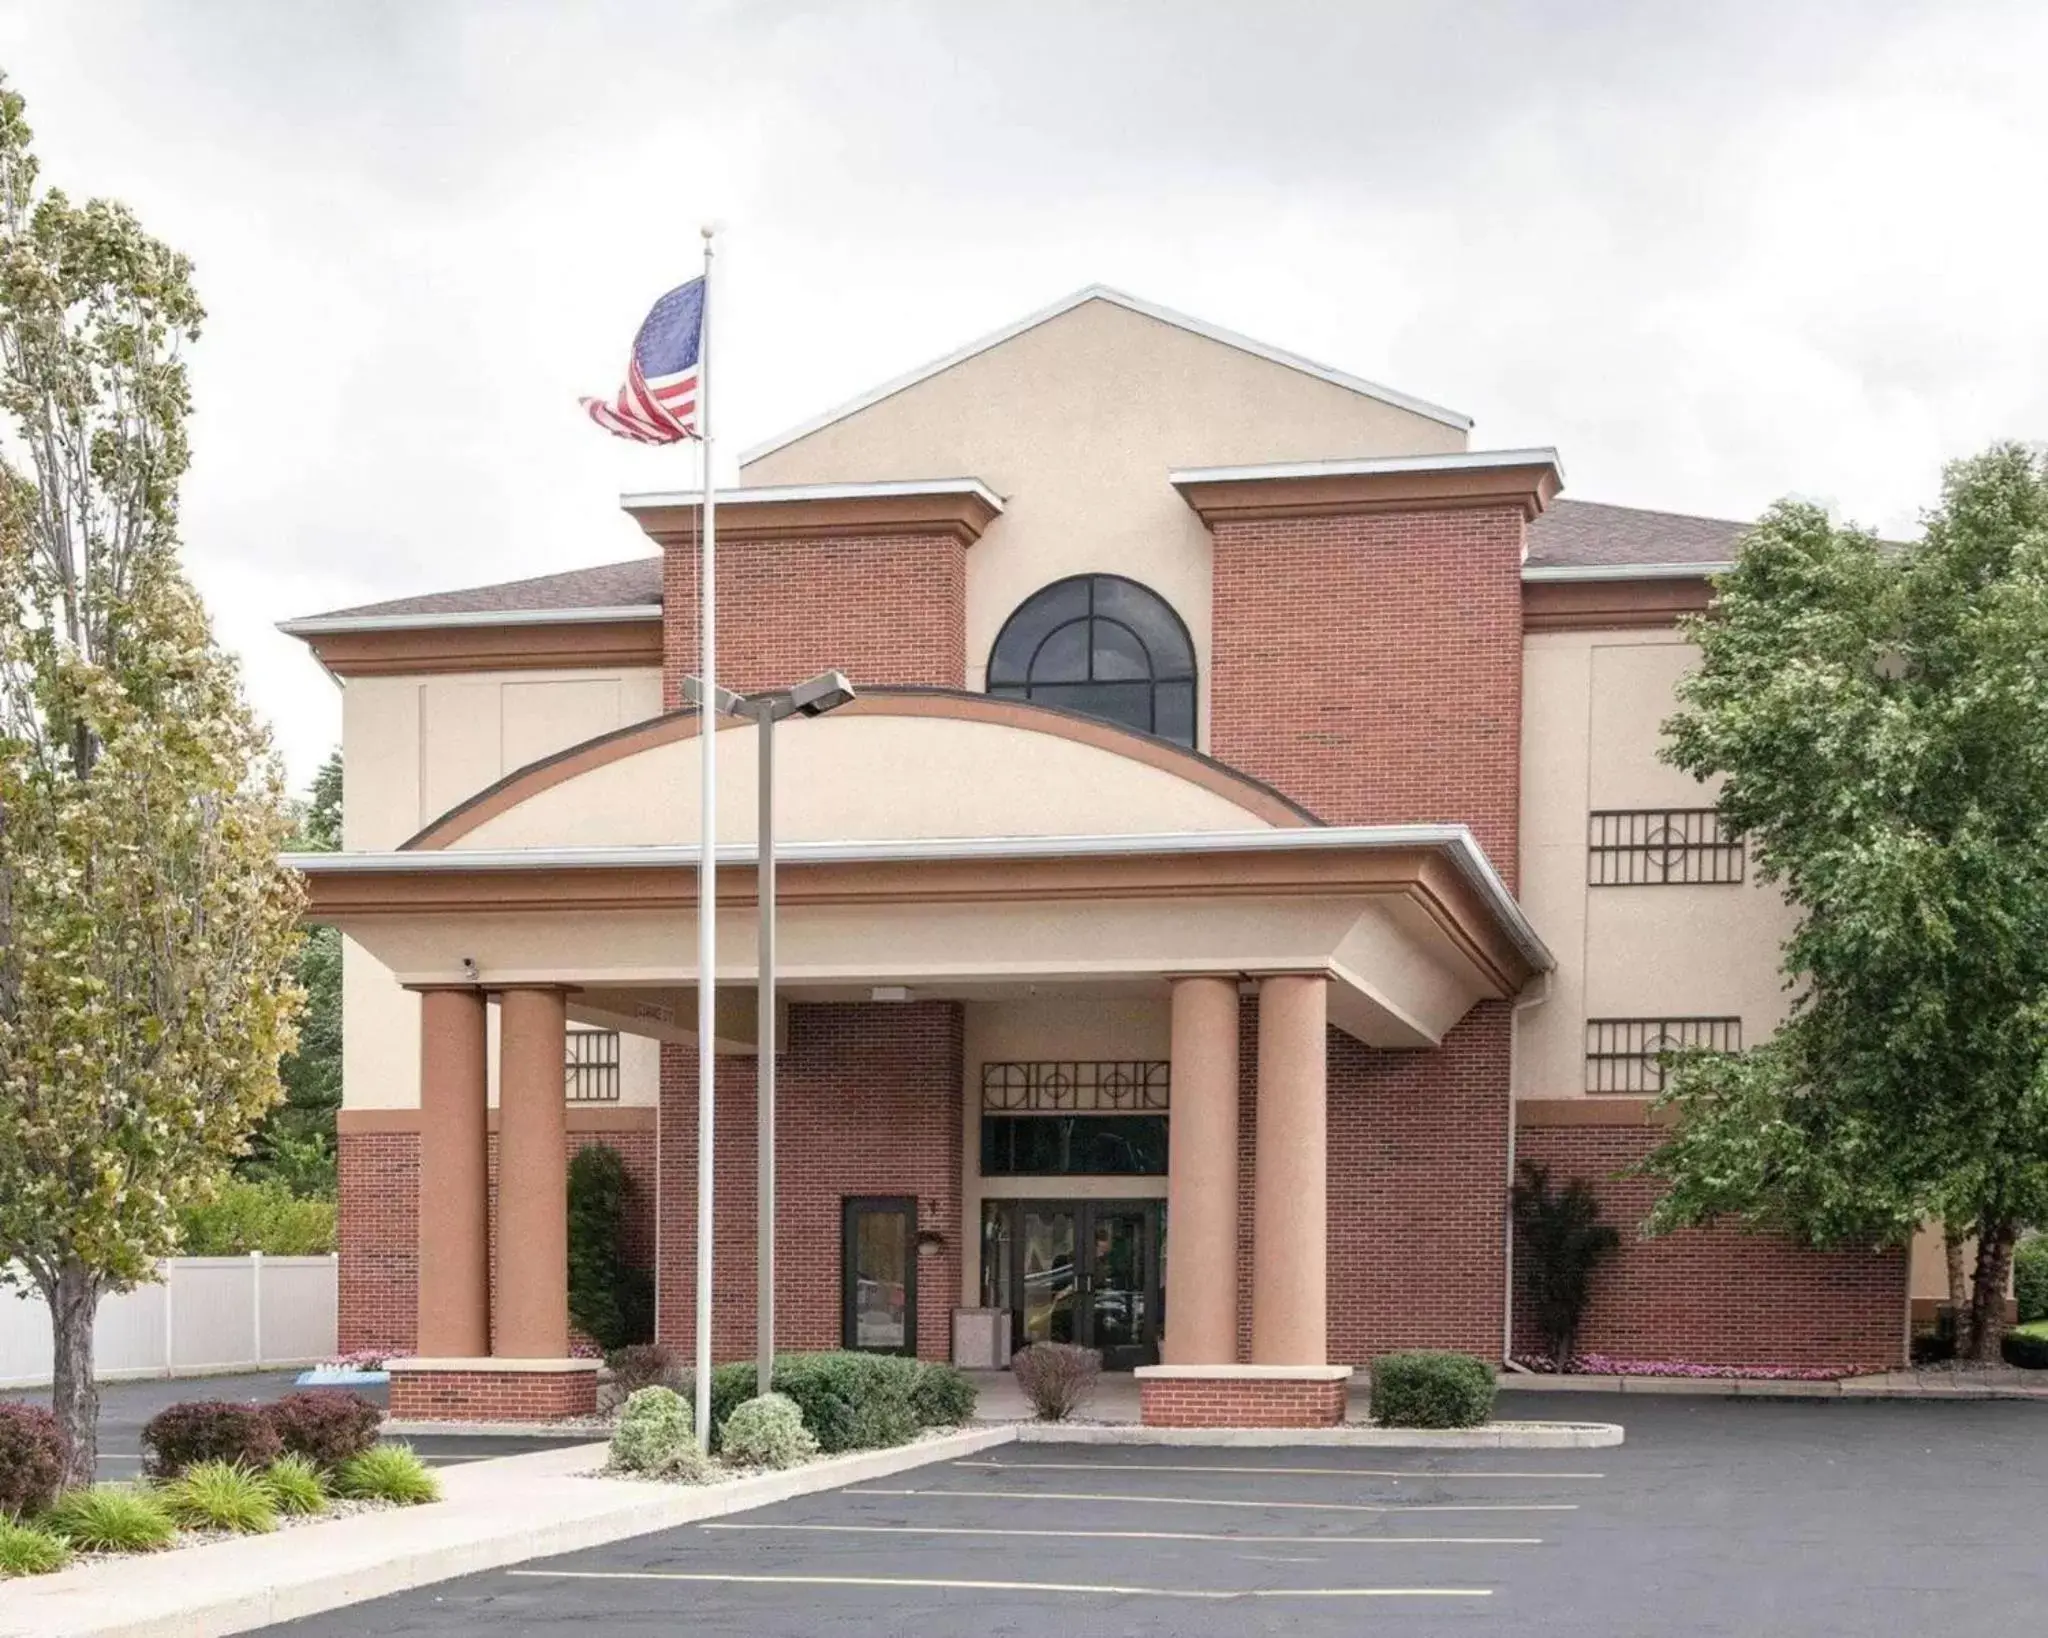 Property building in Quality Inn & Suites Niles